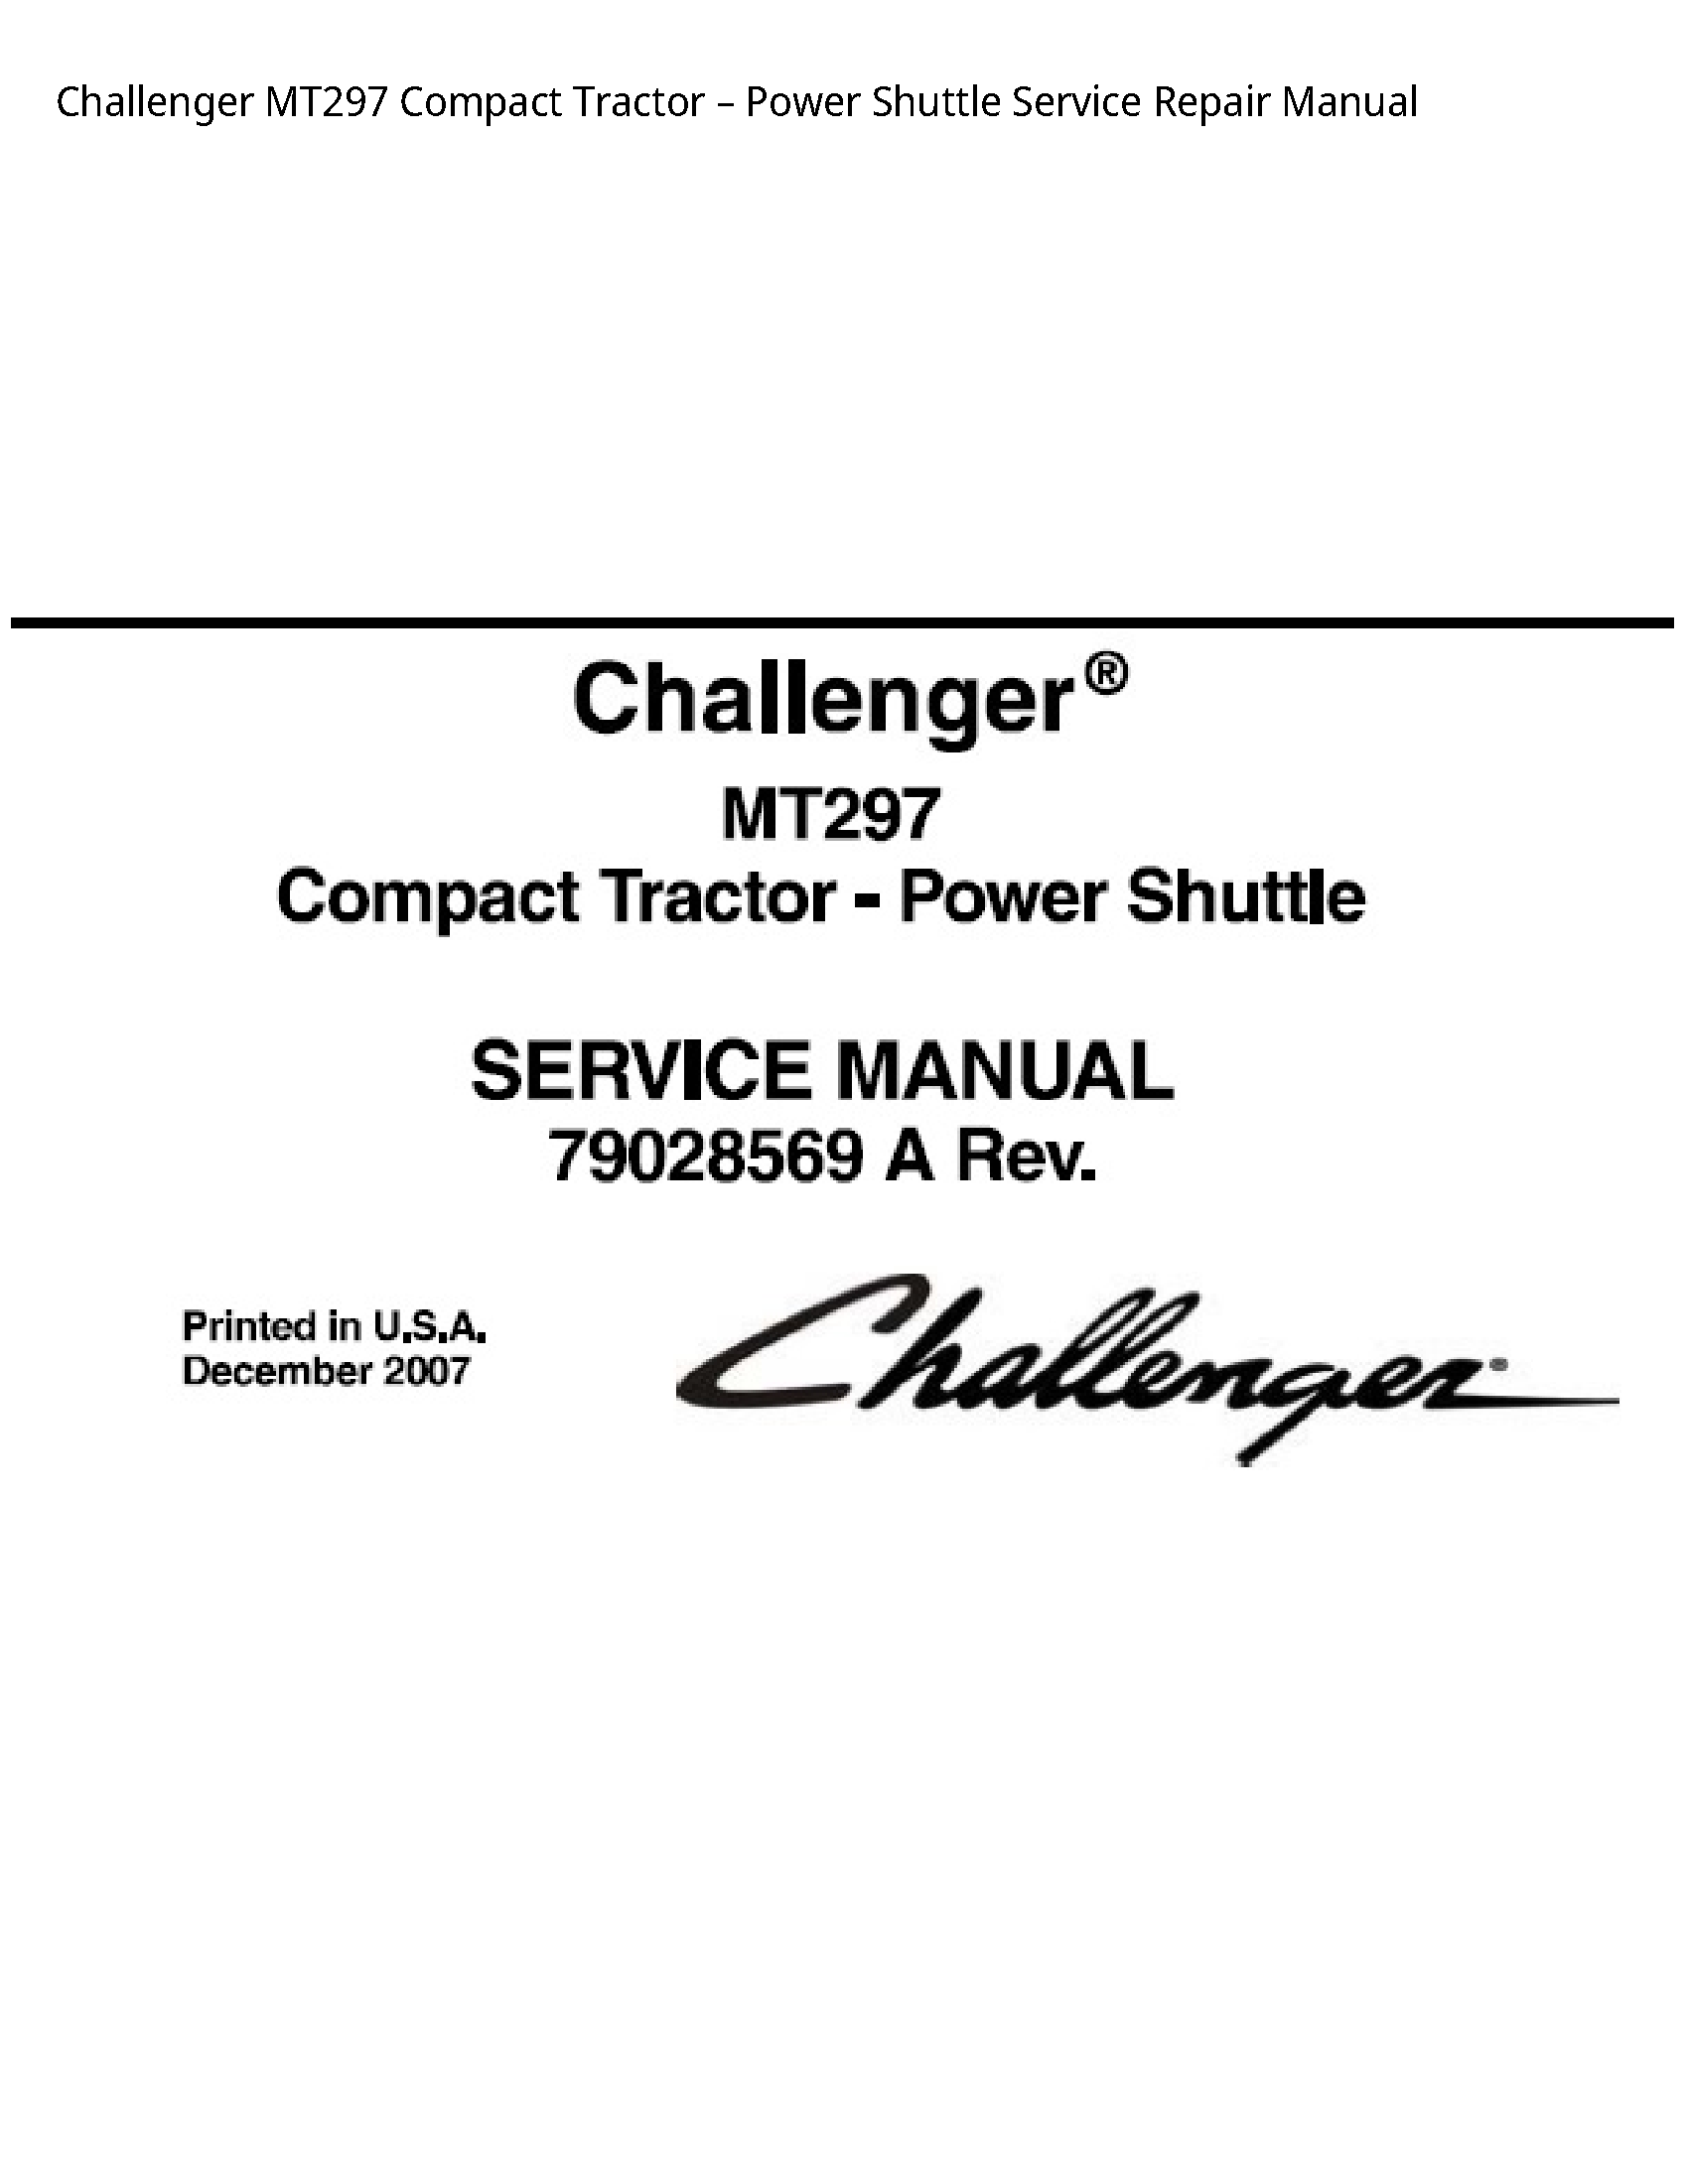 Challenger MT297 Compact Tractor Power Shuttle manual